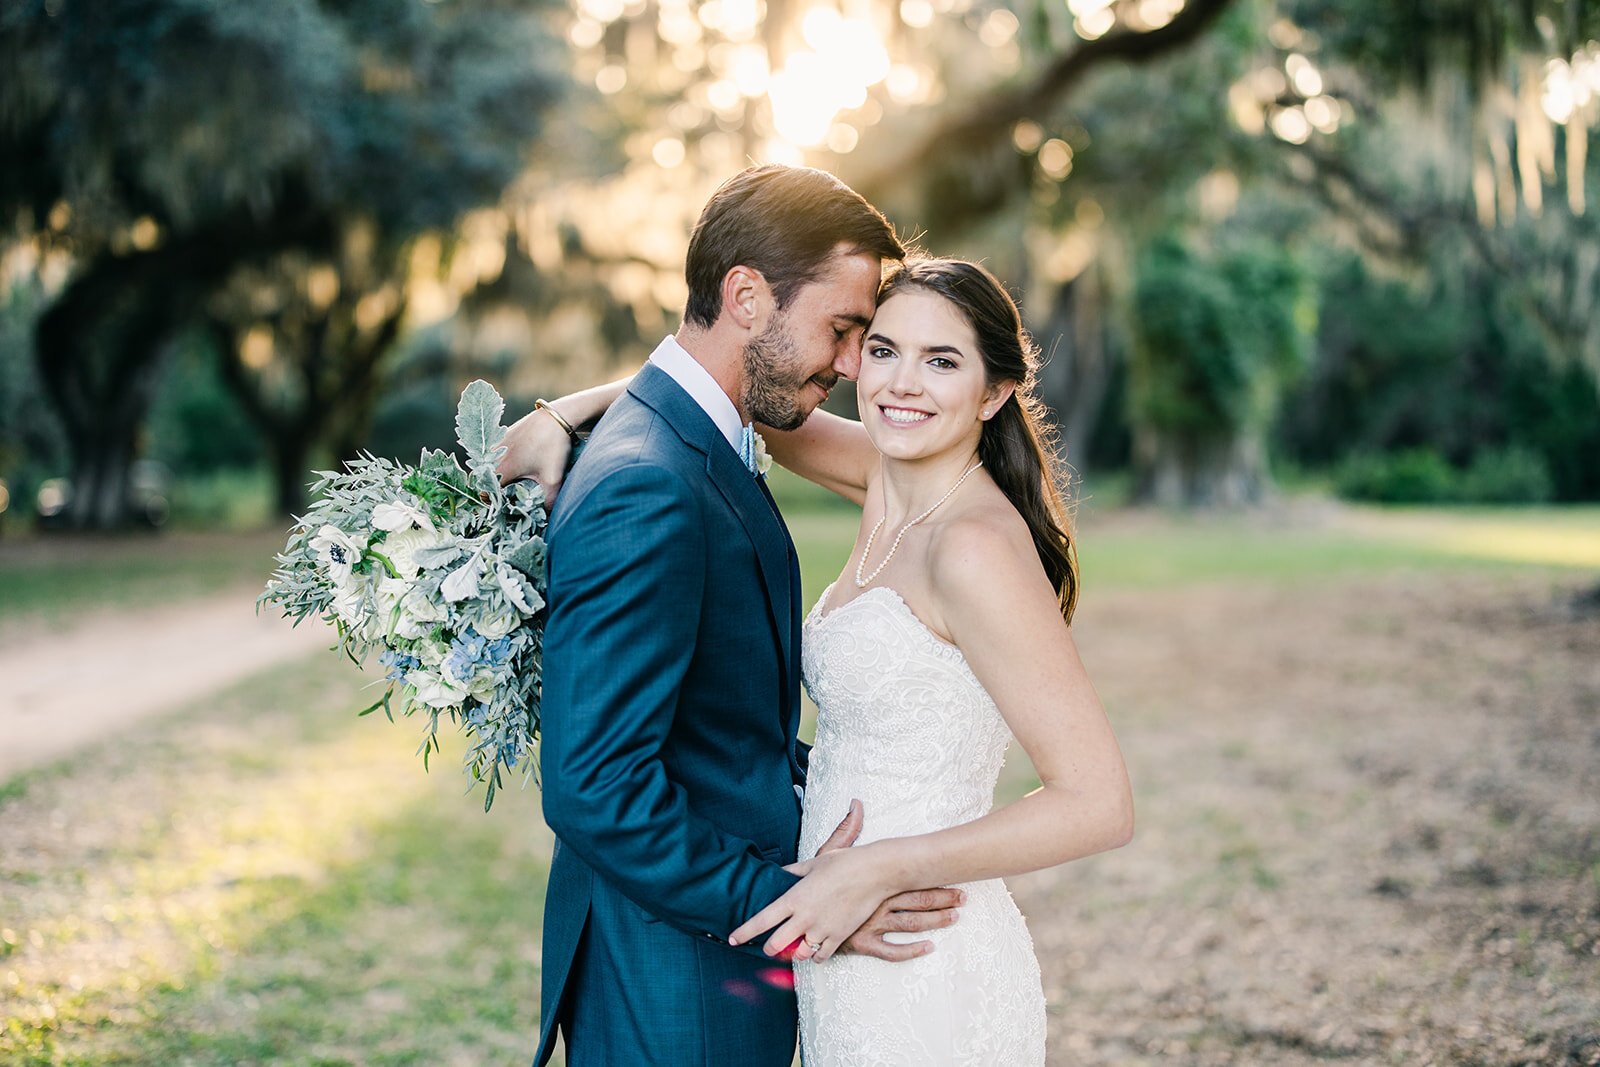 ivory-and-beau-bride-down-for-the-gown-liz-real-bride-blog-southern-bride-maggie-sottero-wedding-dress-bridal-gown-wedding-gown-bridal-shop-bridal-boutique-bridal-shopping-bridal-style-bridal-inspo-savannah-georgia-A63A2316.jpg